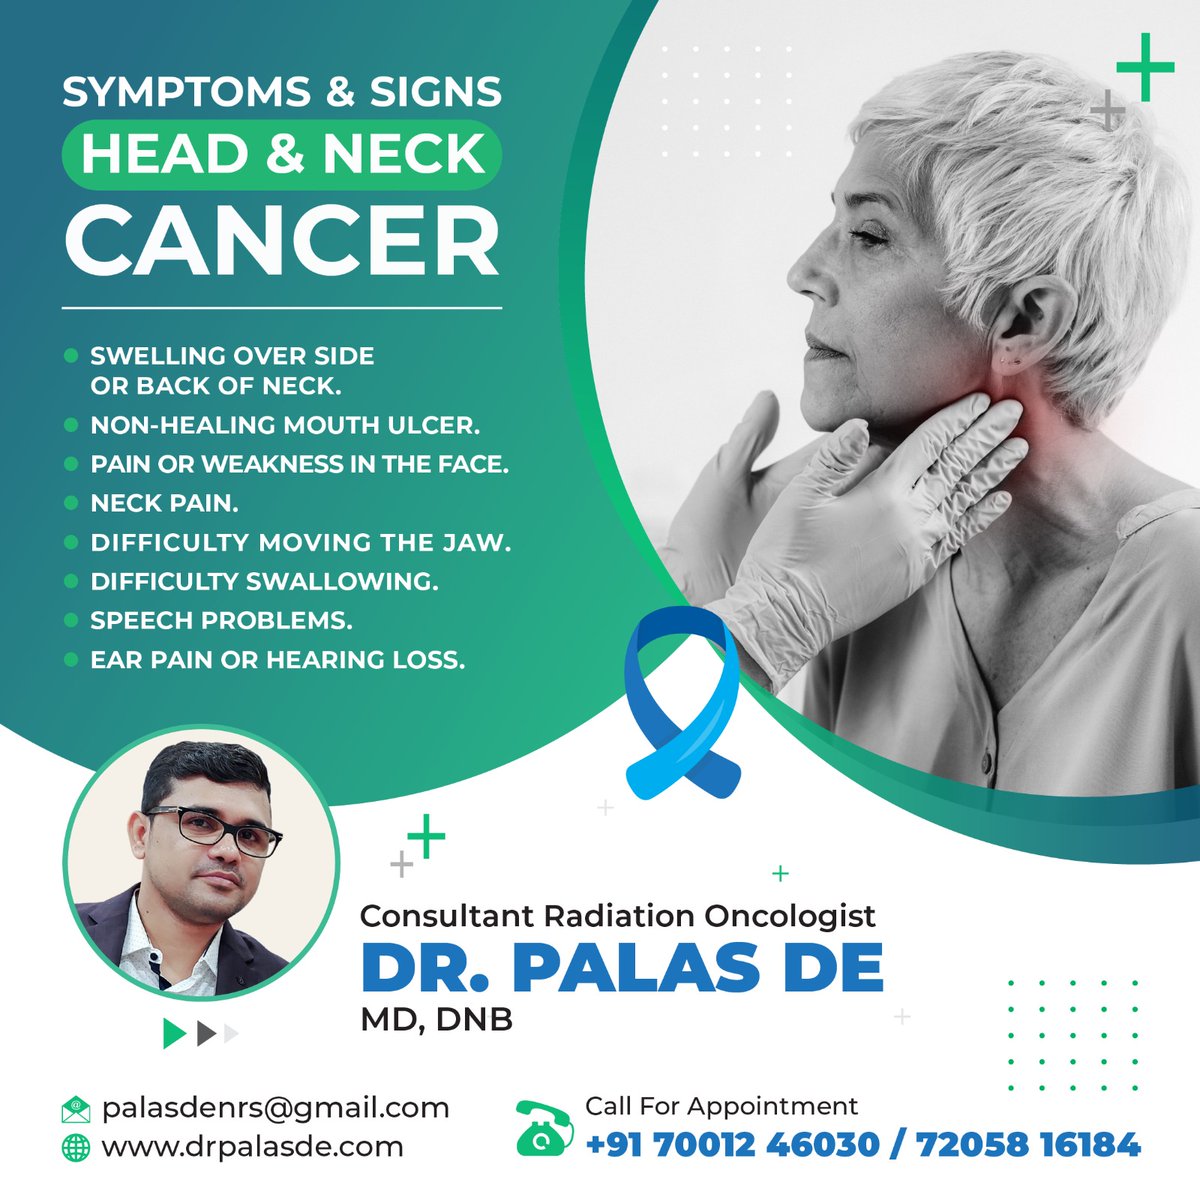 Head and neck cancer treatment can include surgery, #radiationtherapy, chemotherapy & targeted therapy...
Know more about the early symptoms of this disease, early detection can help us better outcome.

#Radiationtherapy #Kolkata #HeadNeckCancer #RadiationOncologist